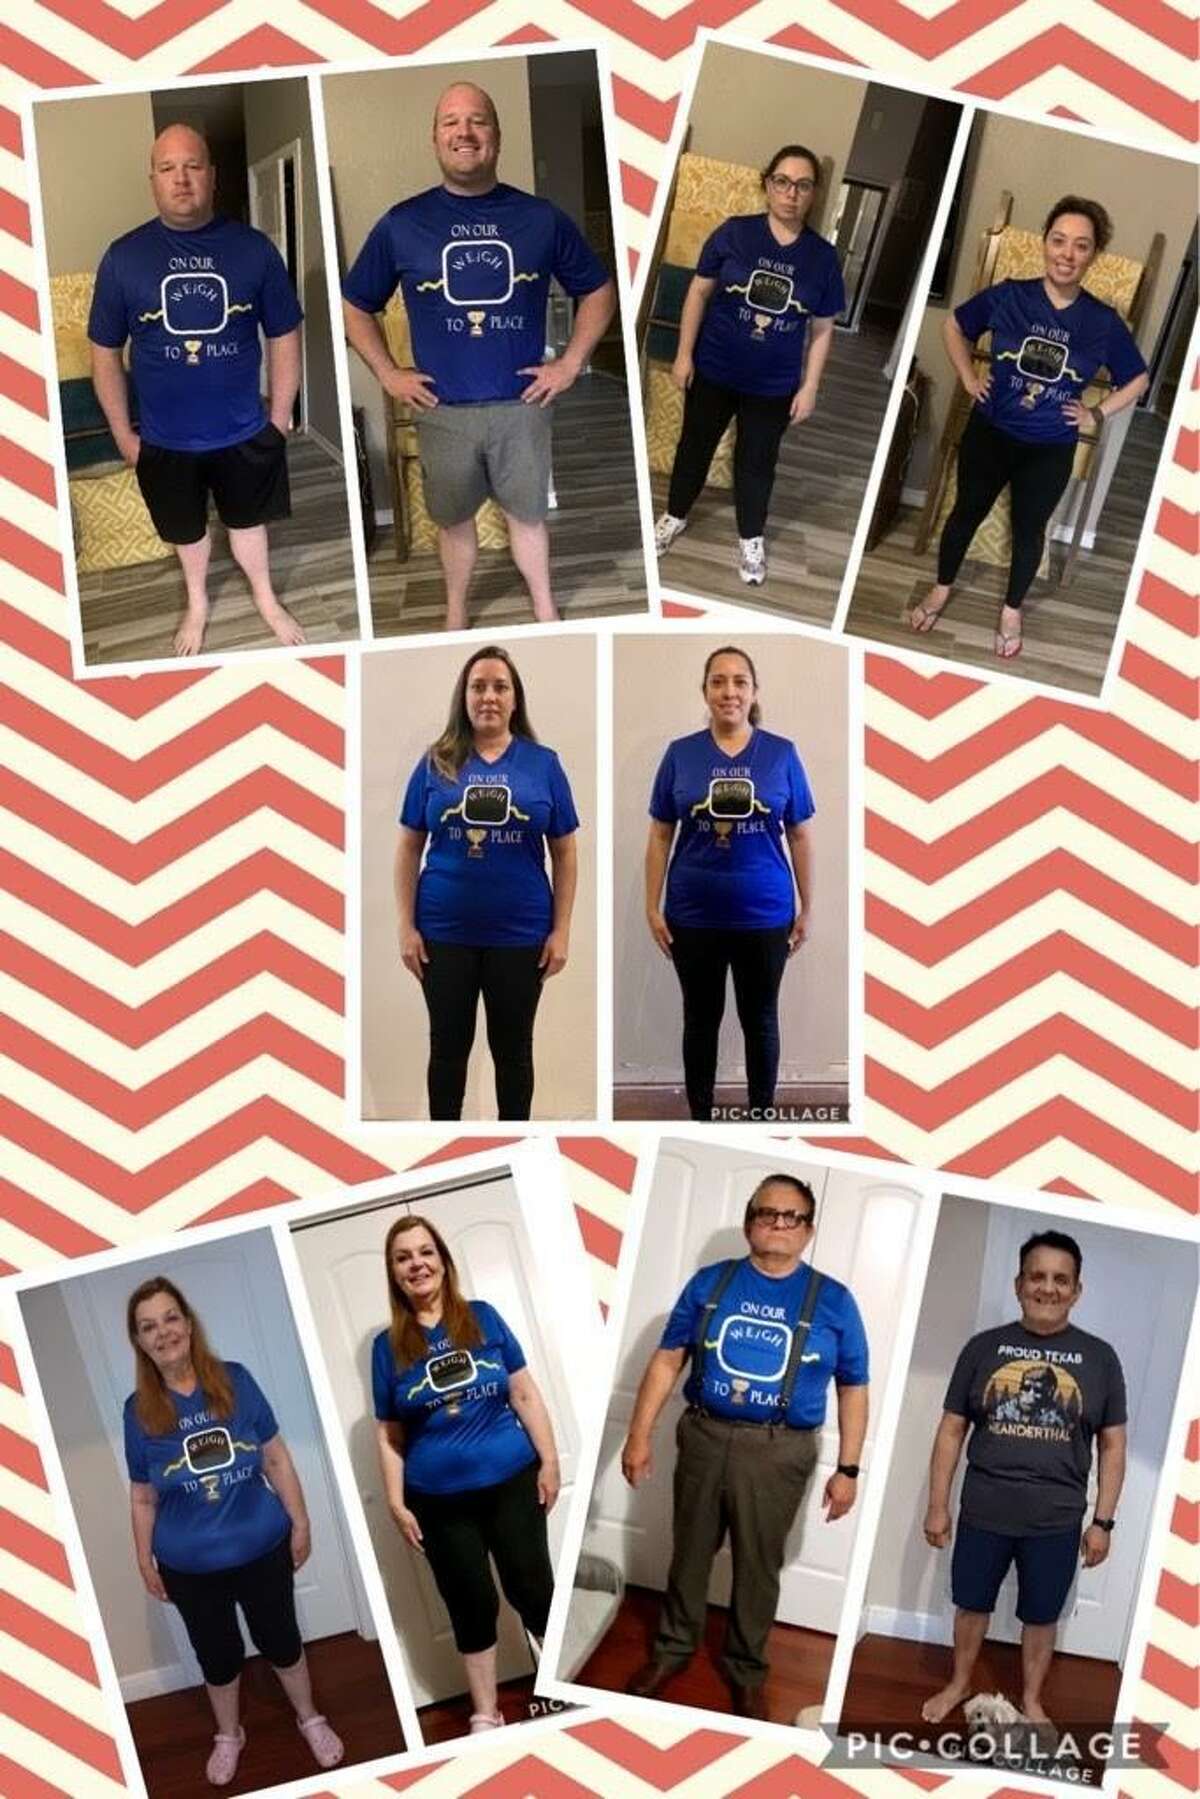 Team On Our Weigh to 1st Place pictured in their before and after photos. The group won first in their district and sixth nationally in the HealthyWage Weight Loss Challenge.